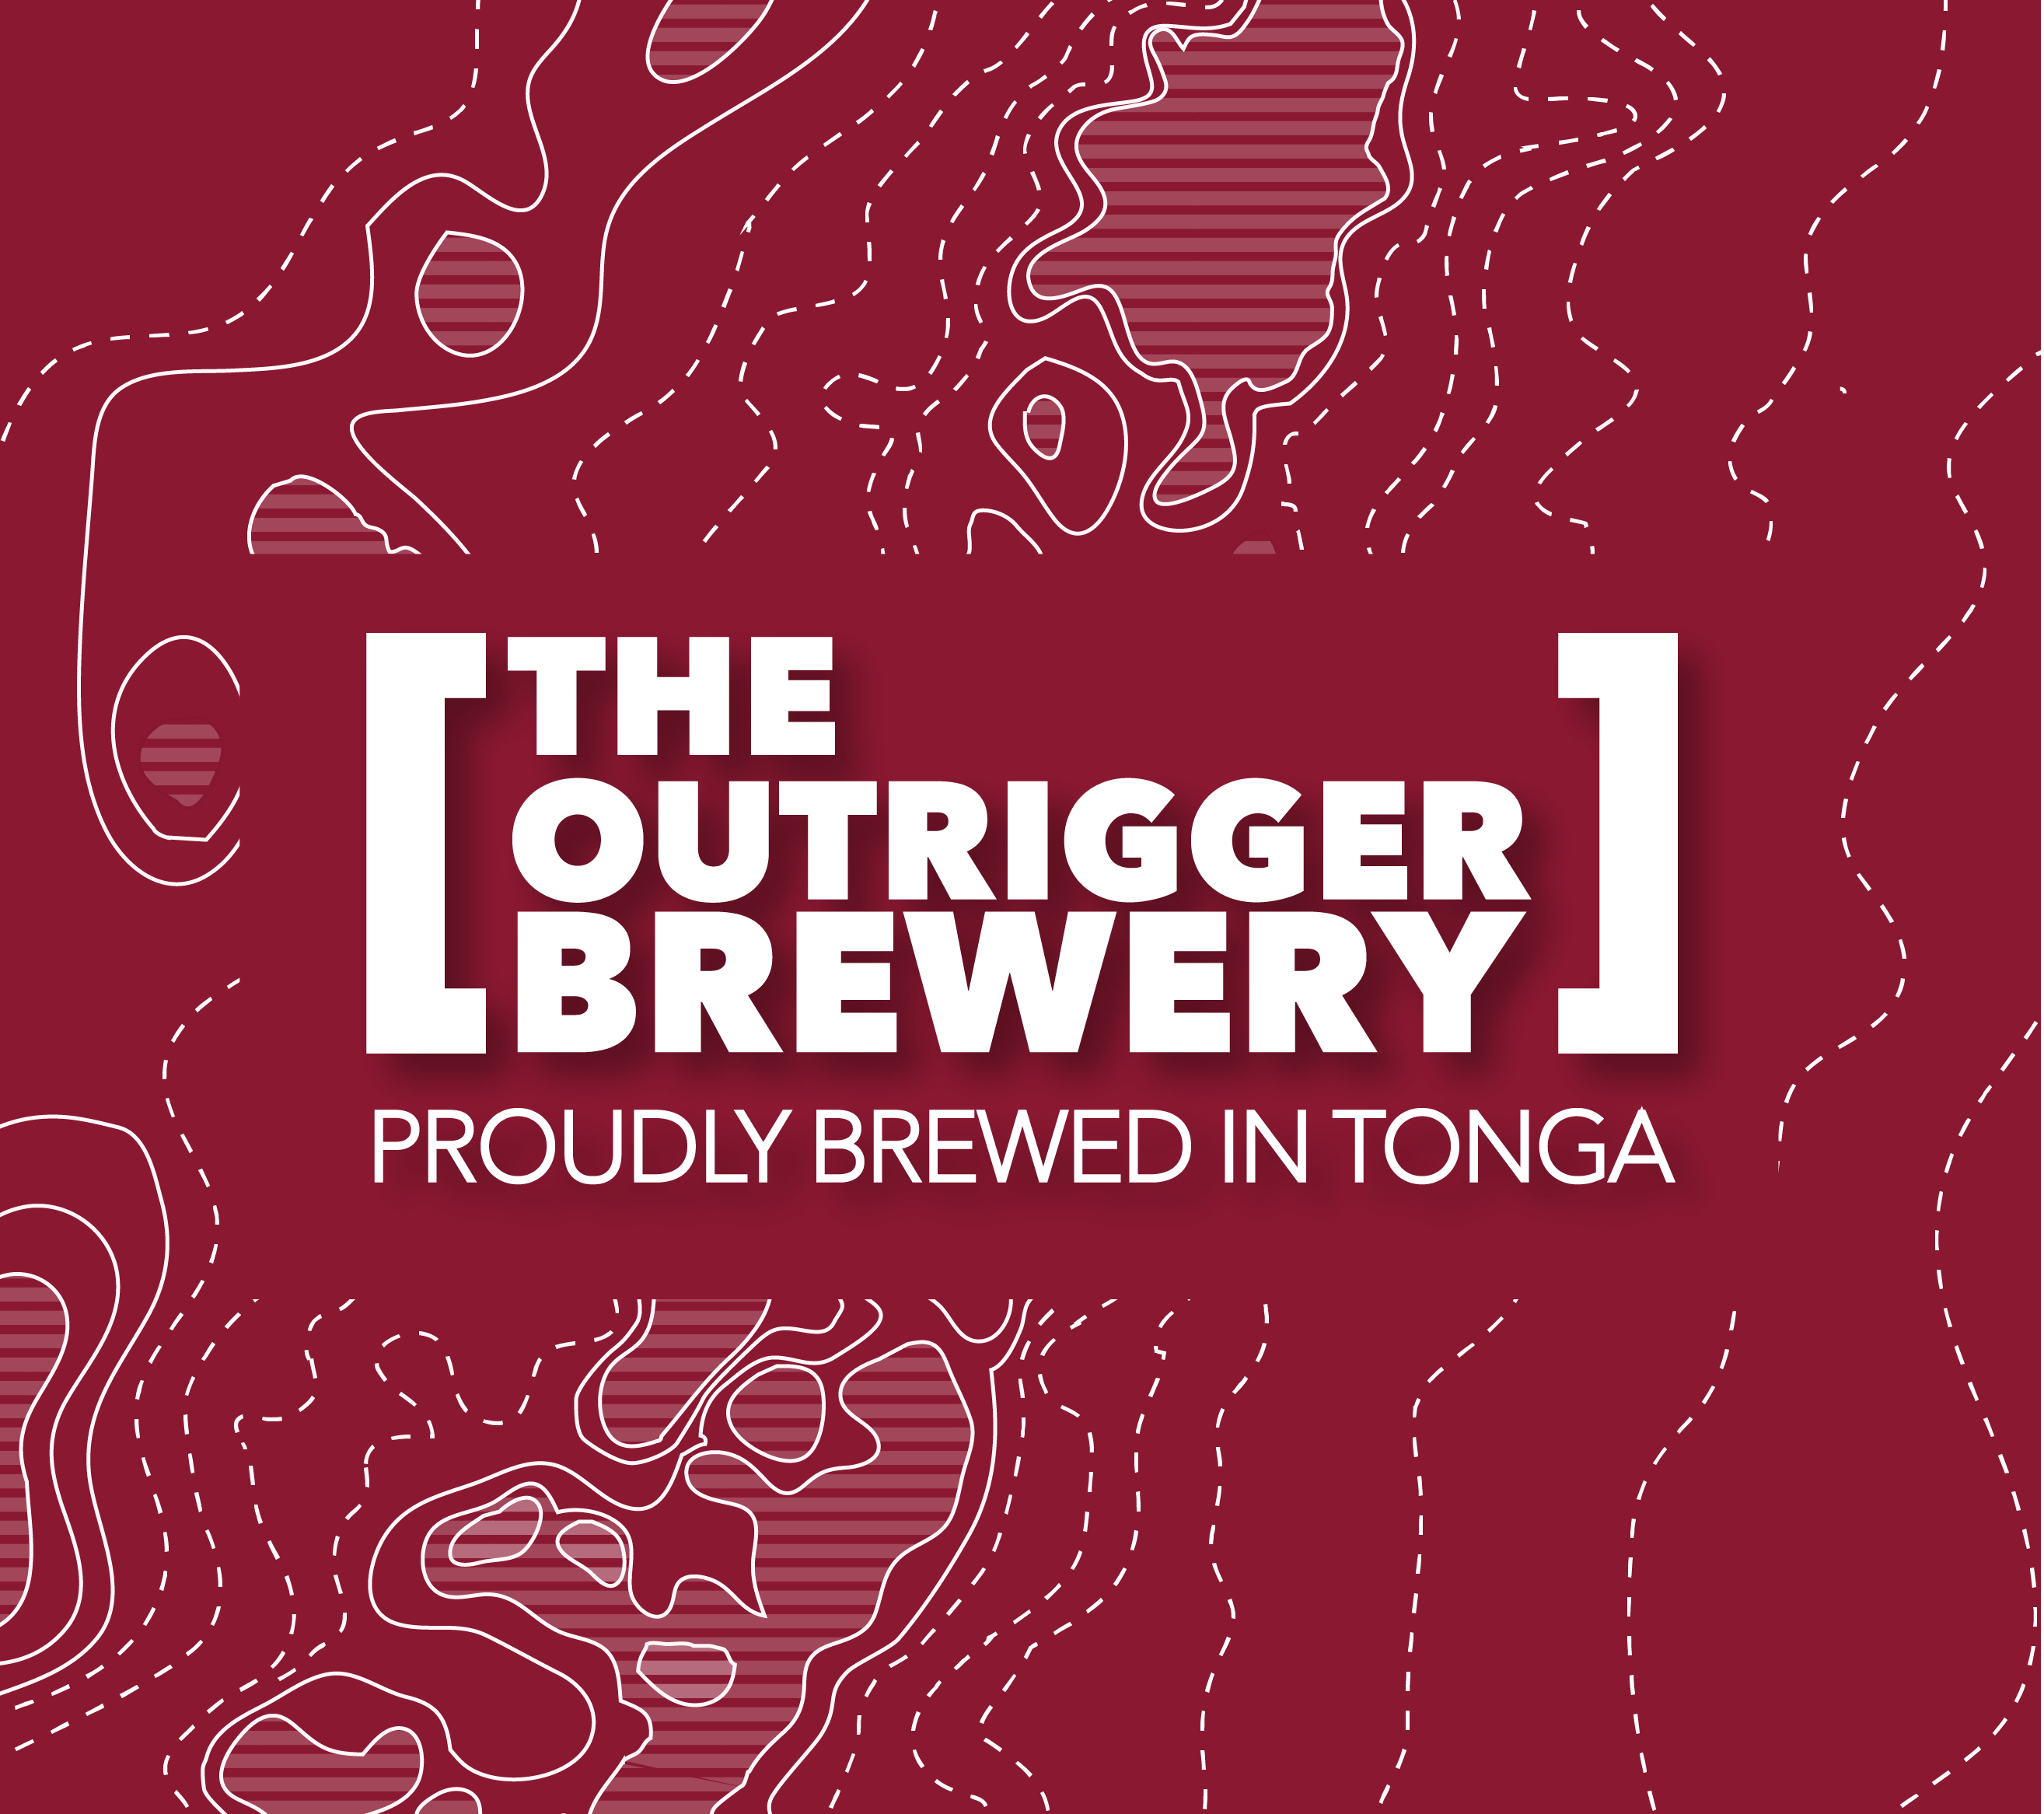 Outrigger brewery